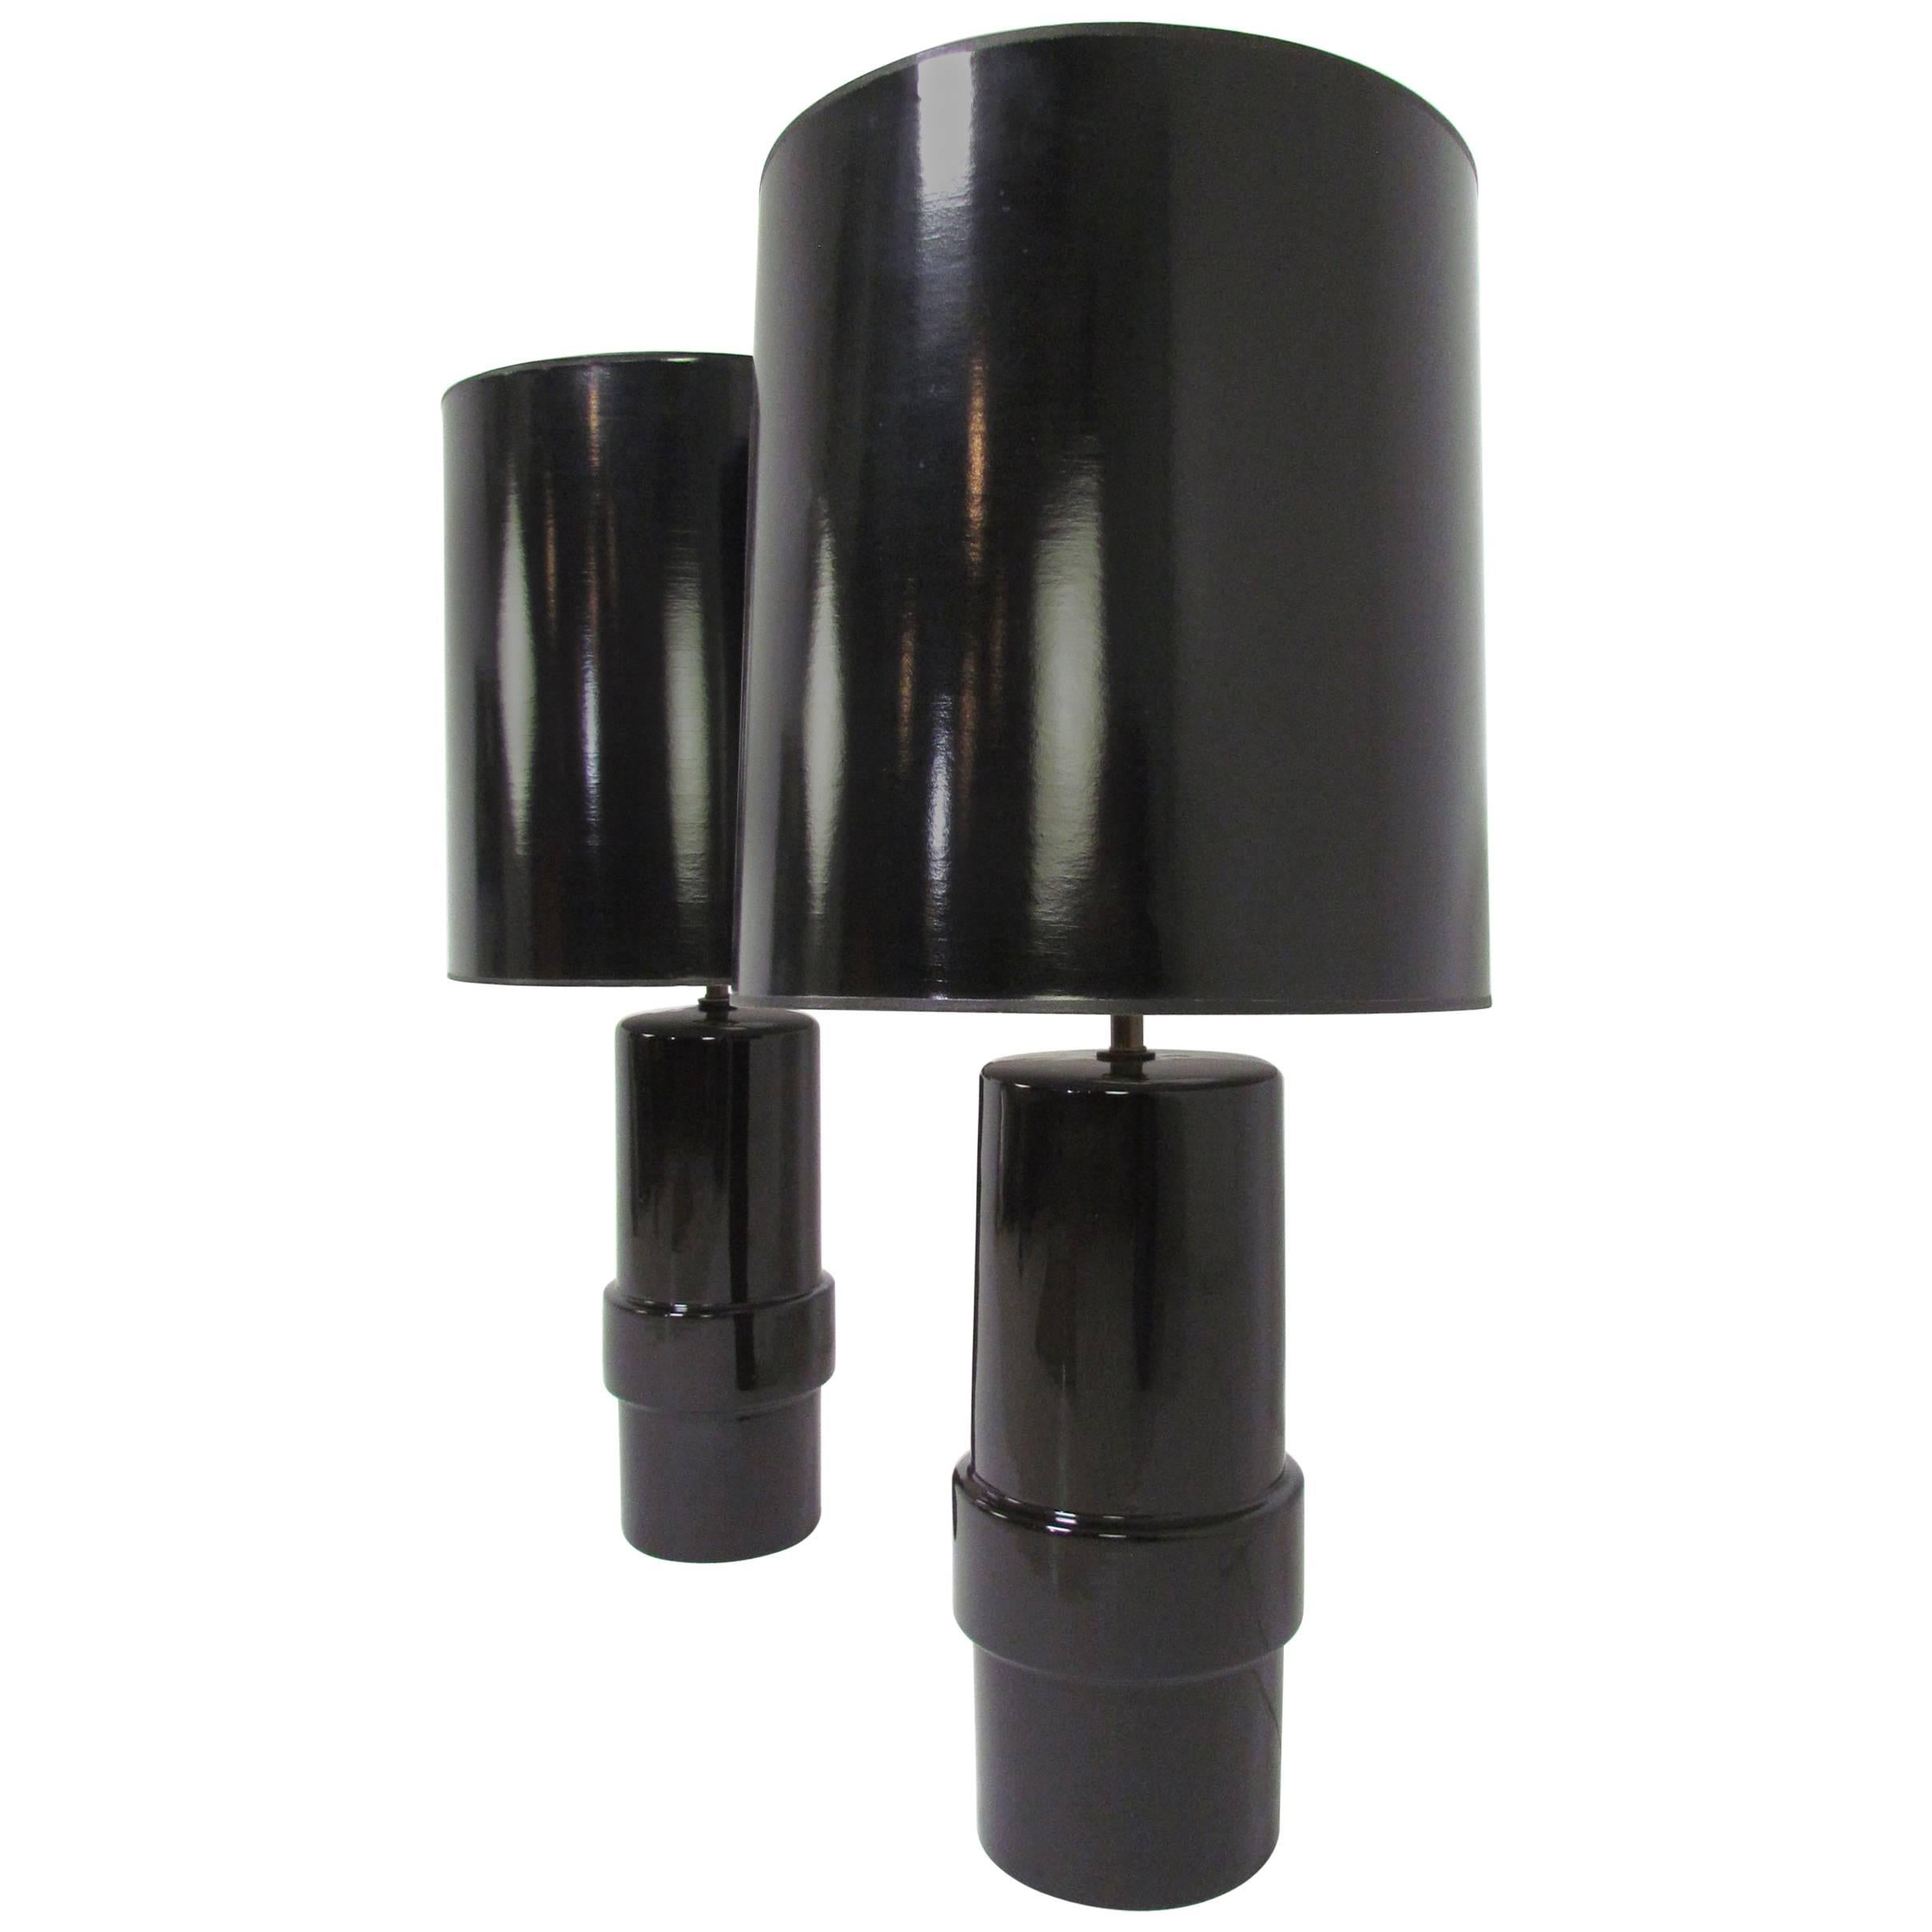 Pair of Large Cylindrical Black Ceramic Table Lamps, circa 1970s